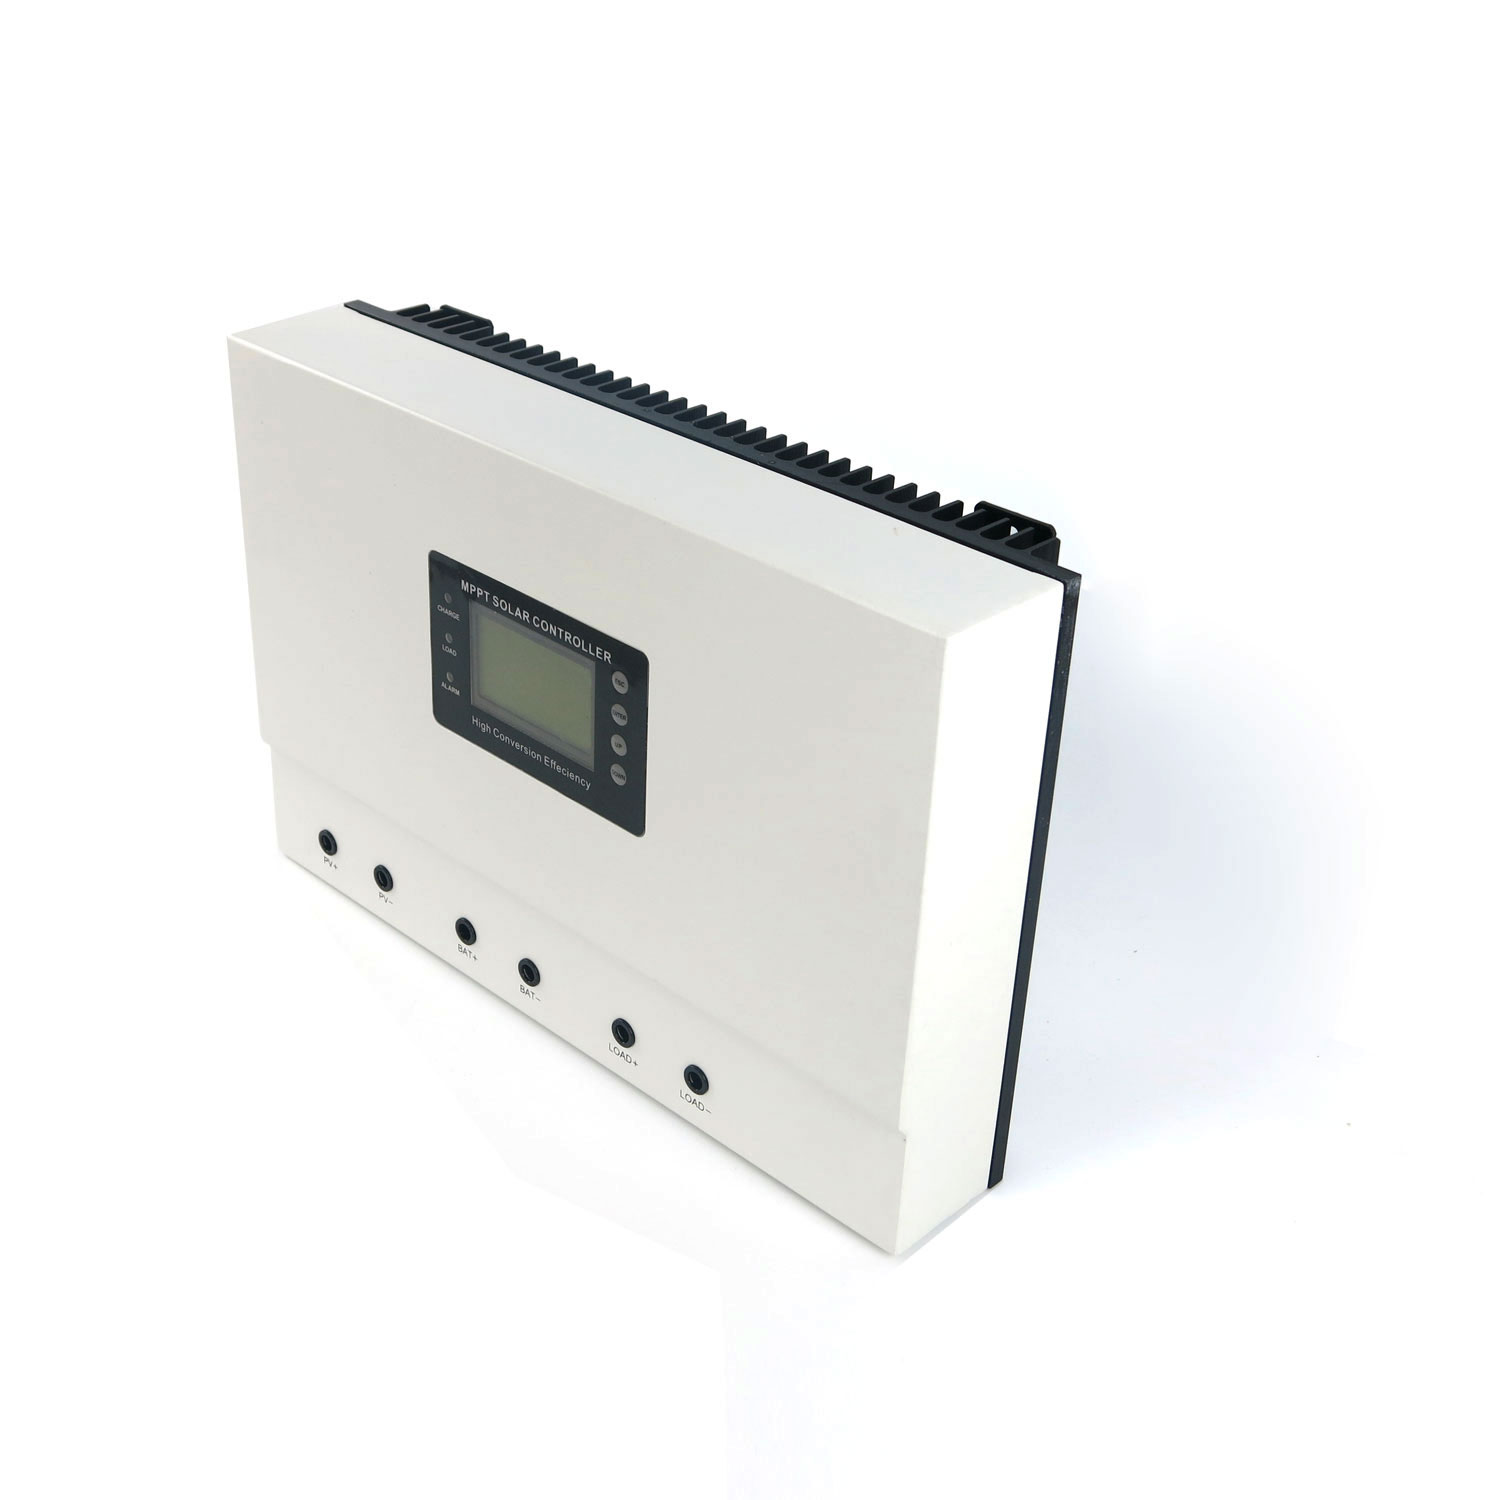 IPandee High efficiency 48V 100A MPPT solar controller for telecom base station